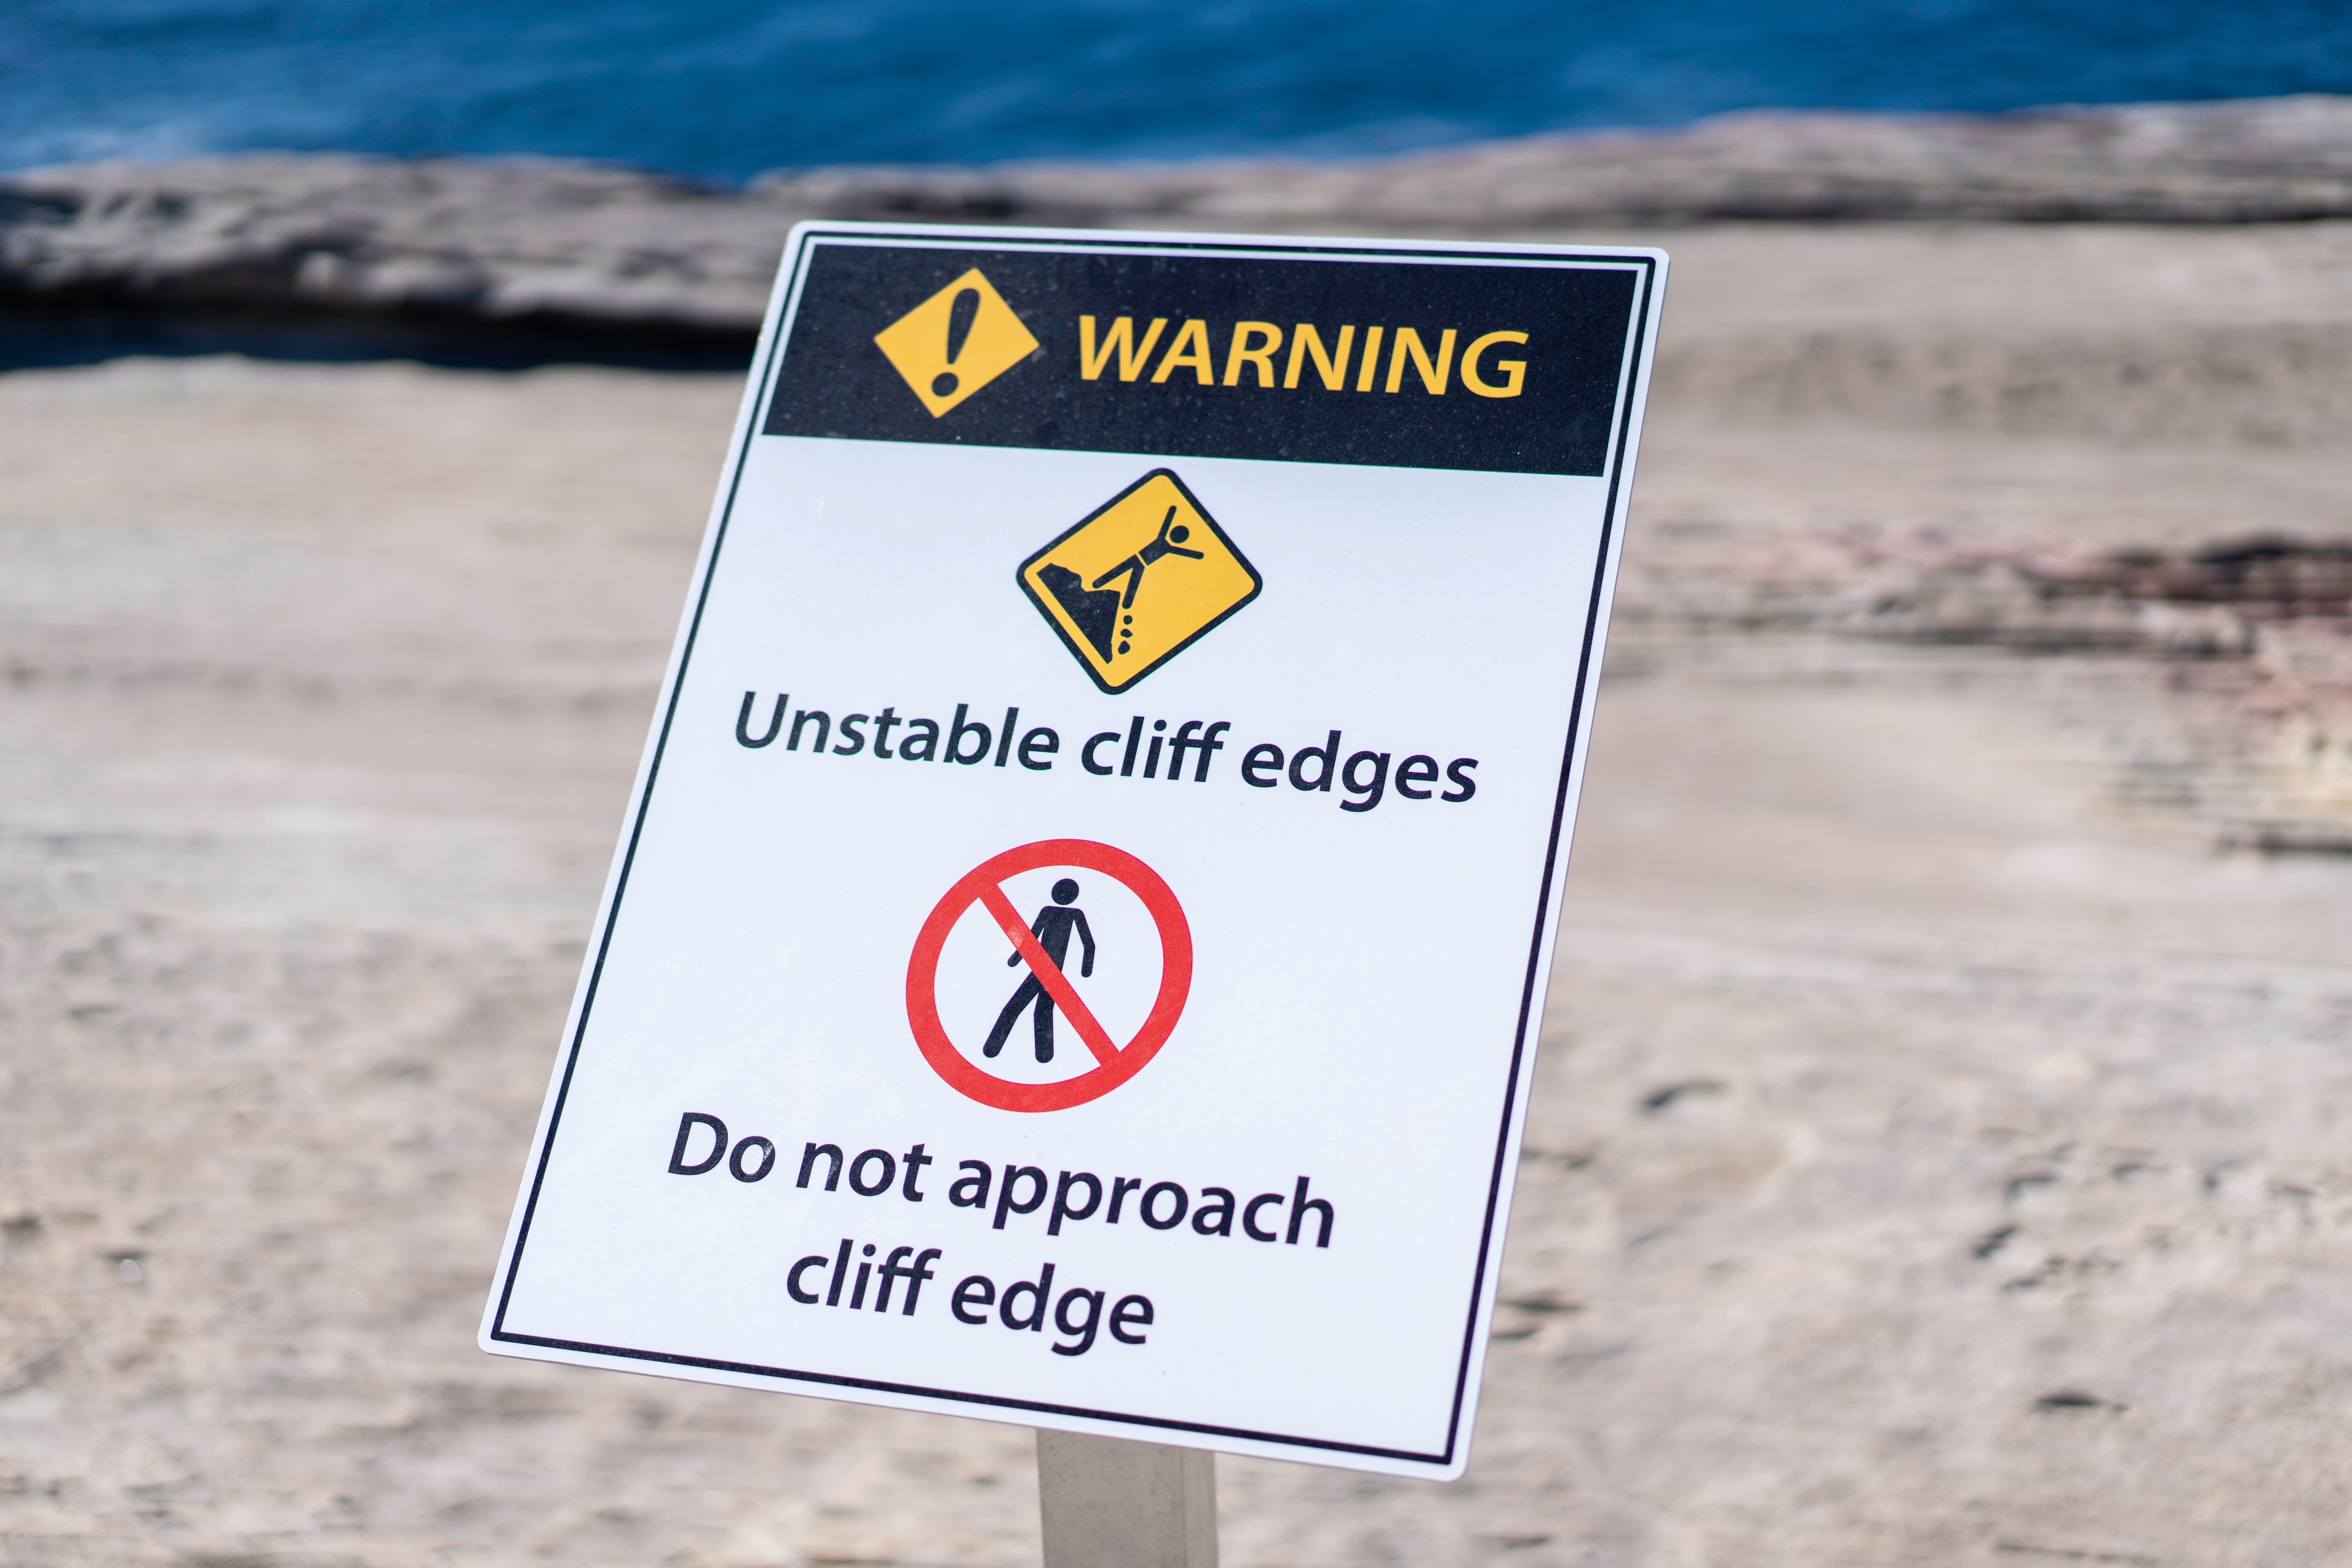 Approaching a cliff edge